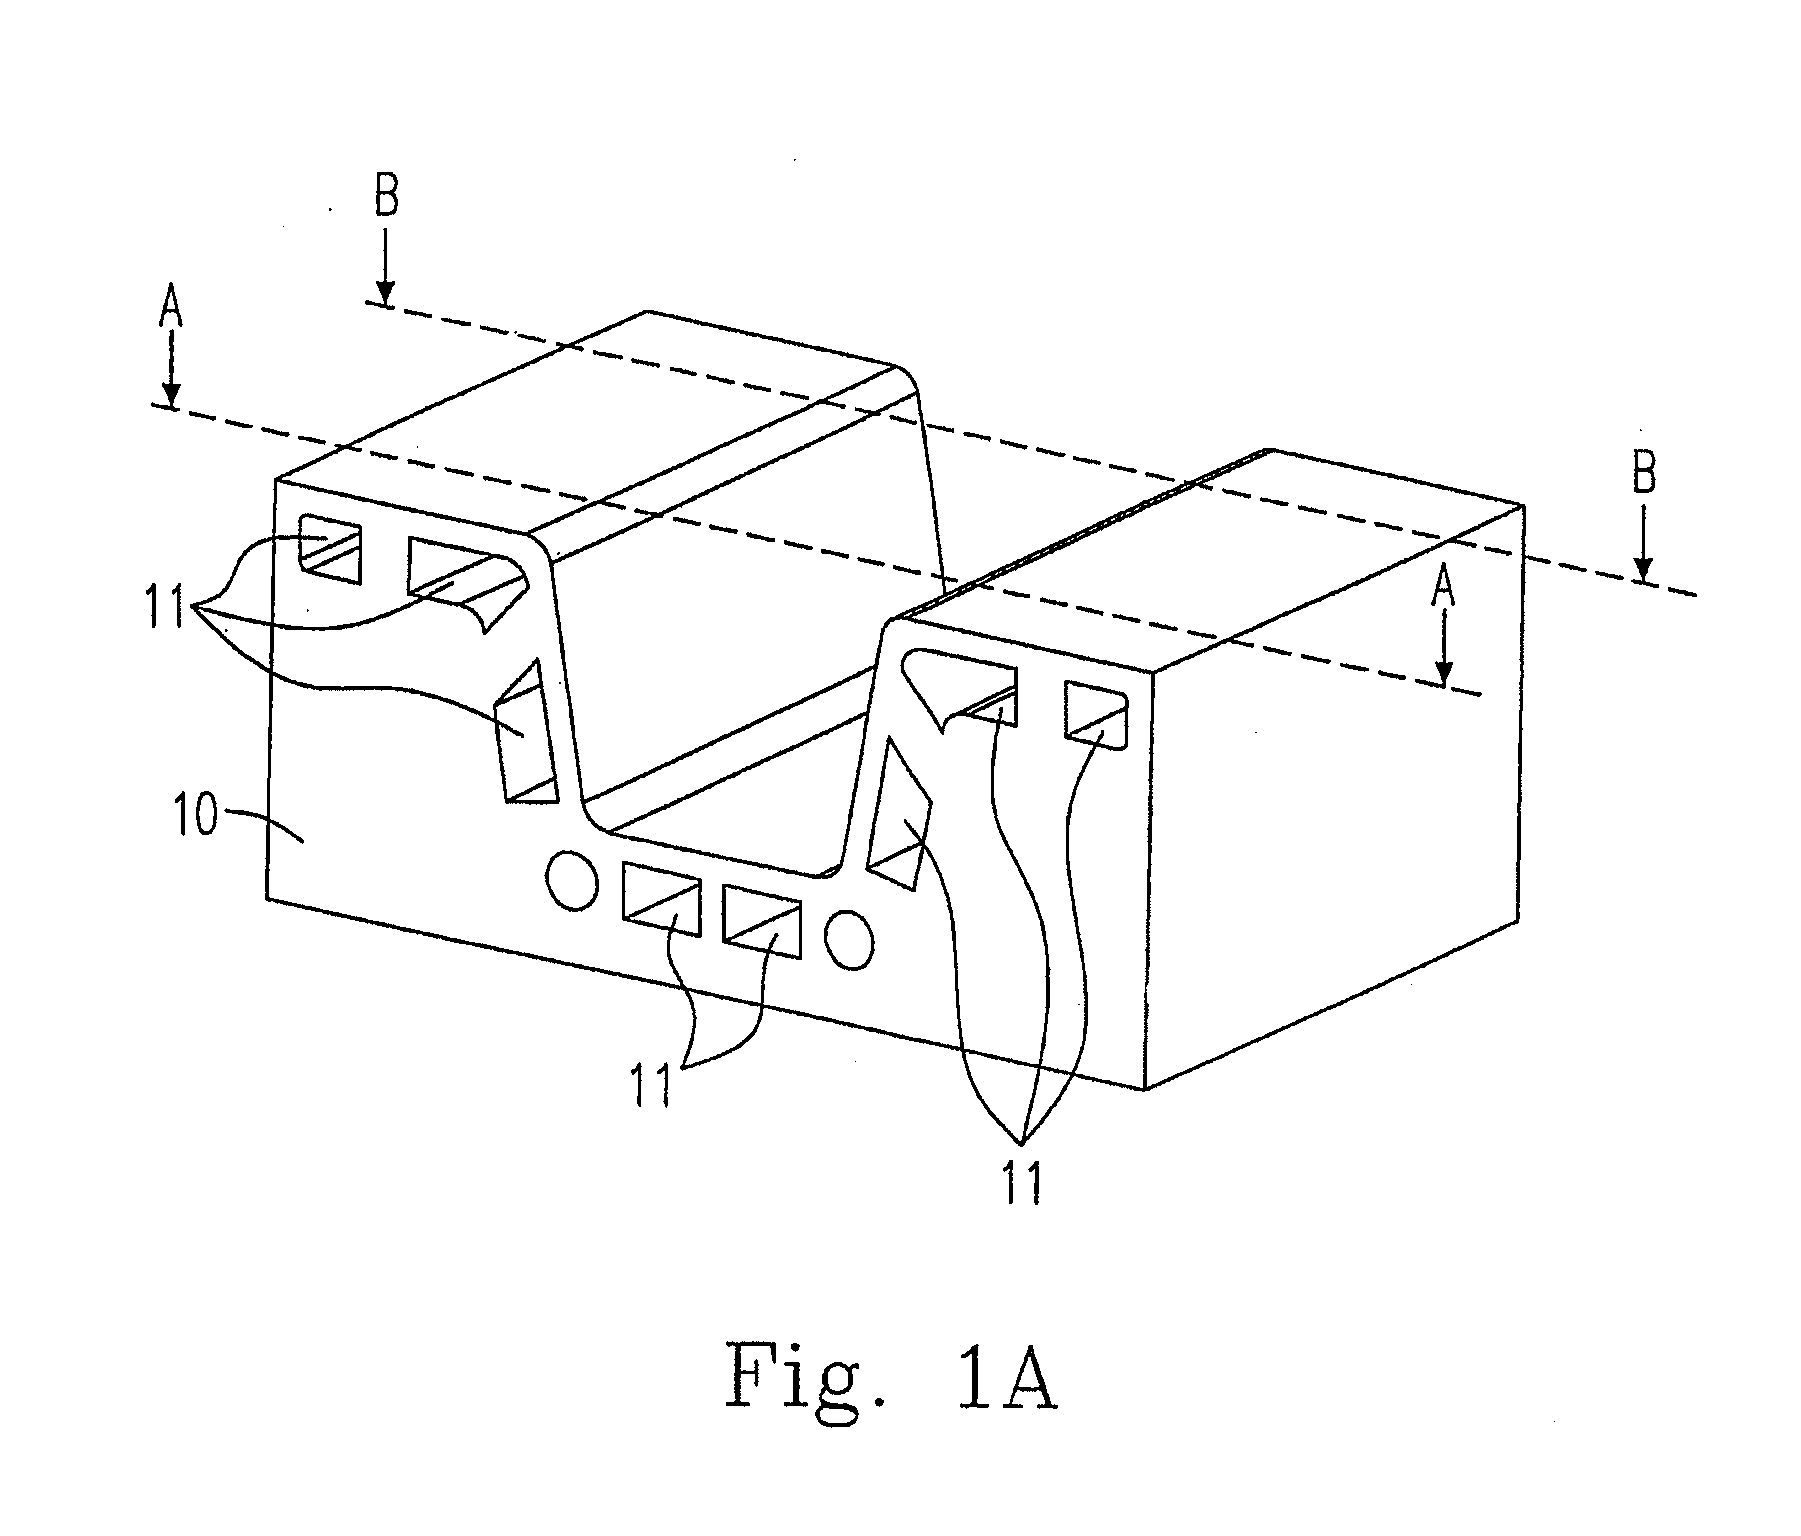 Mold and method for sectionally adjusting cooling efficiency of the mold